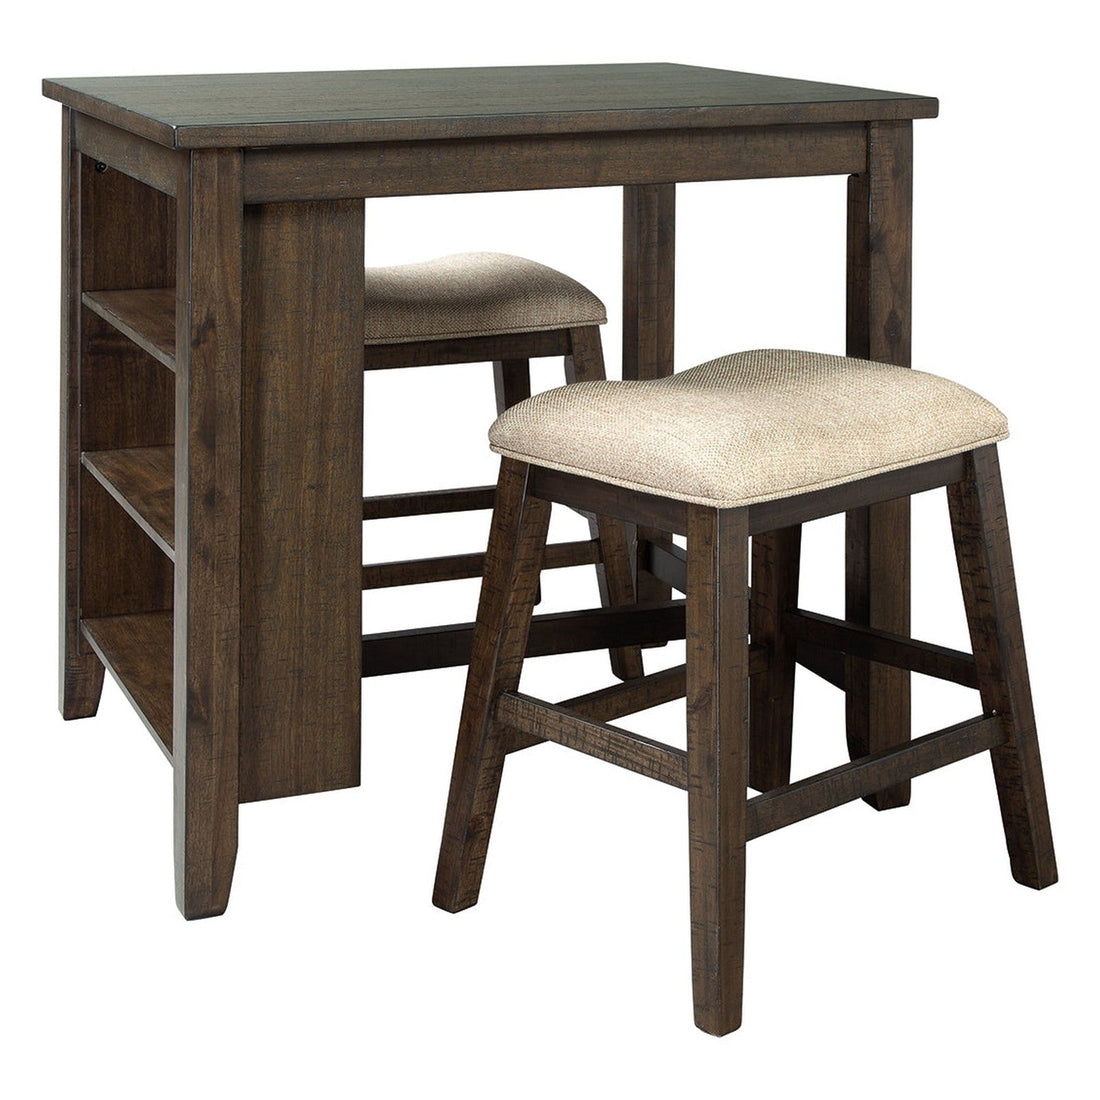 Rokane Counter Height Dining Table and Bar Stools (Set of 3) Ash-D397-113